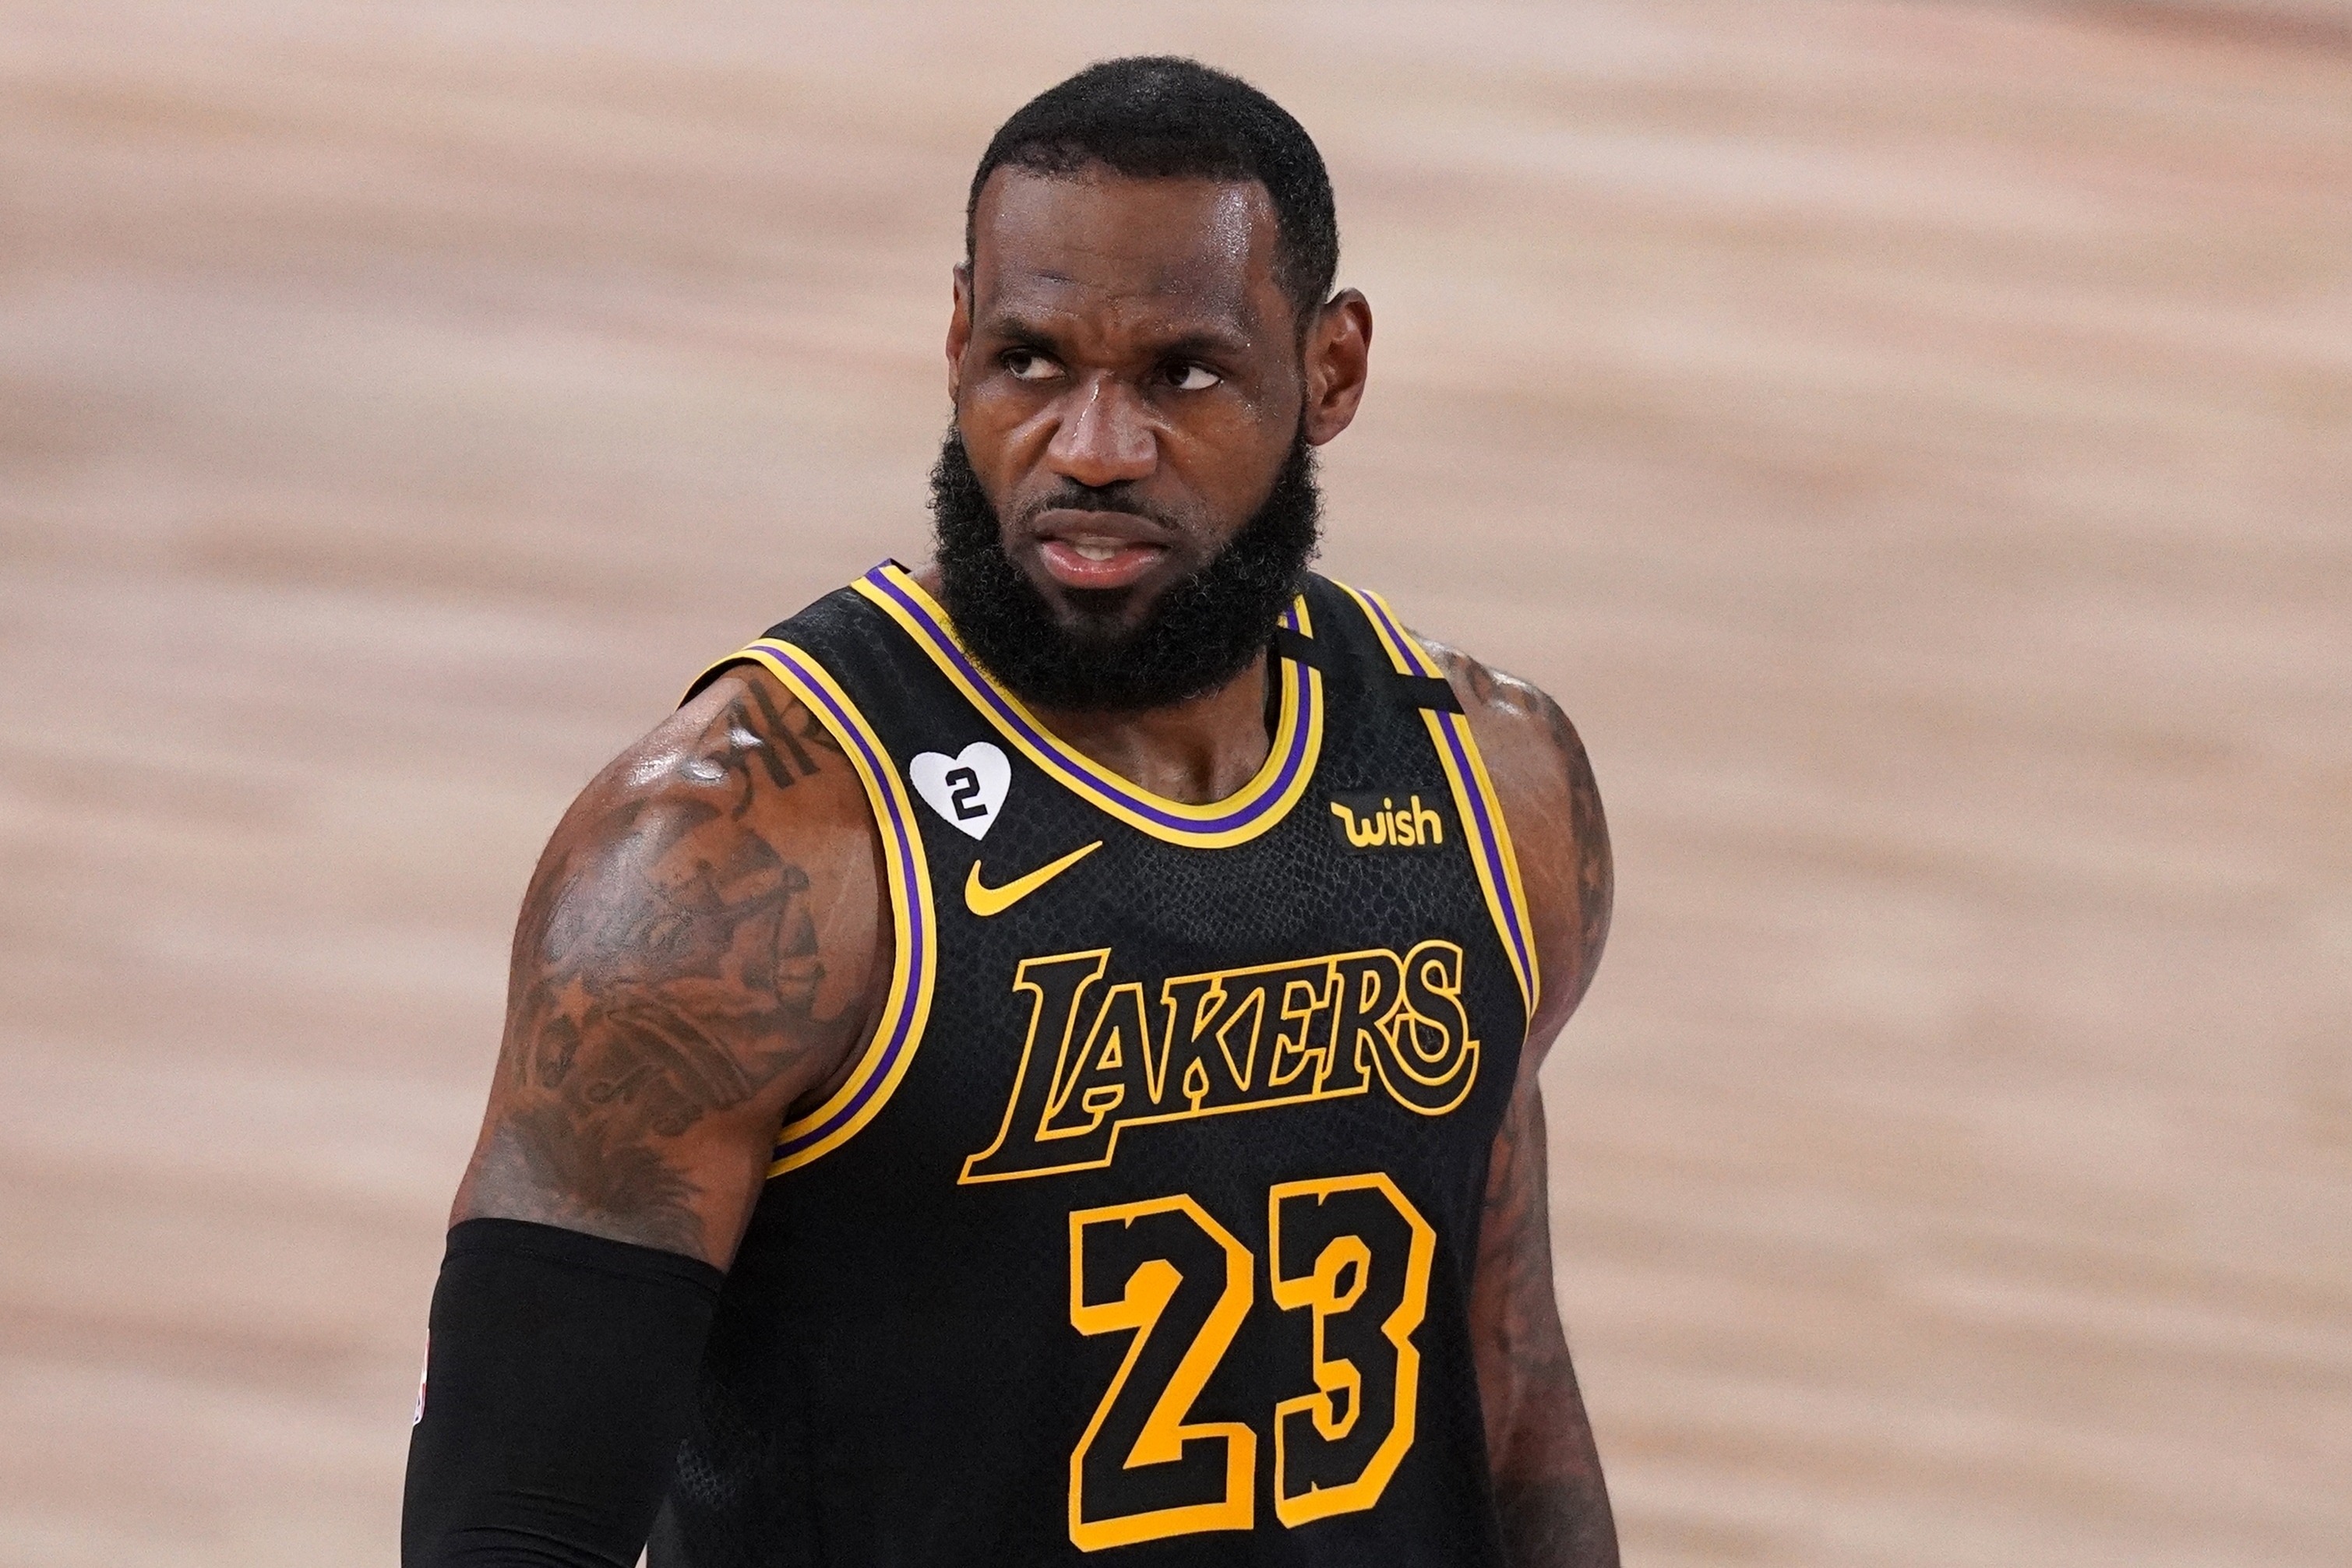 Every known LeBron James tattoo on his body